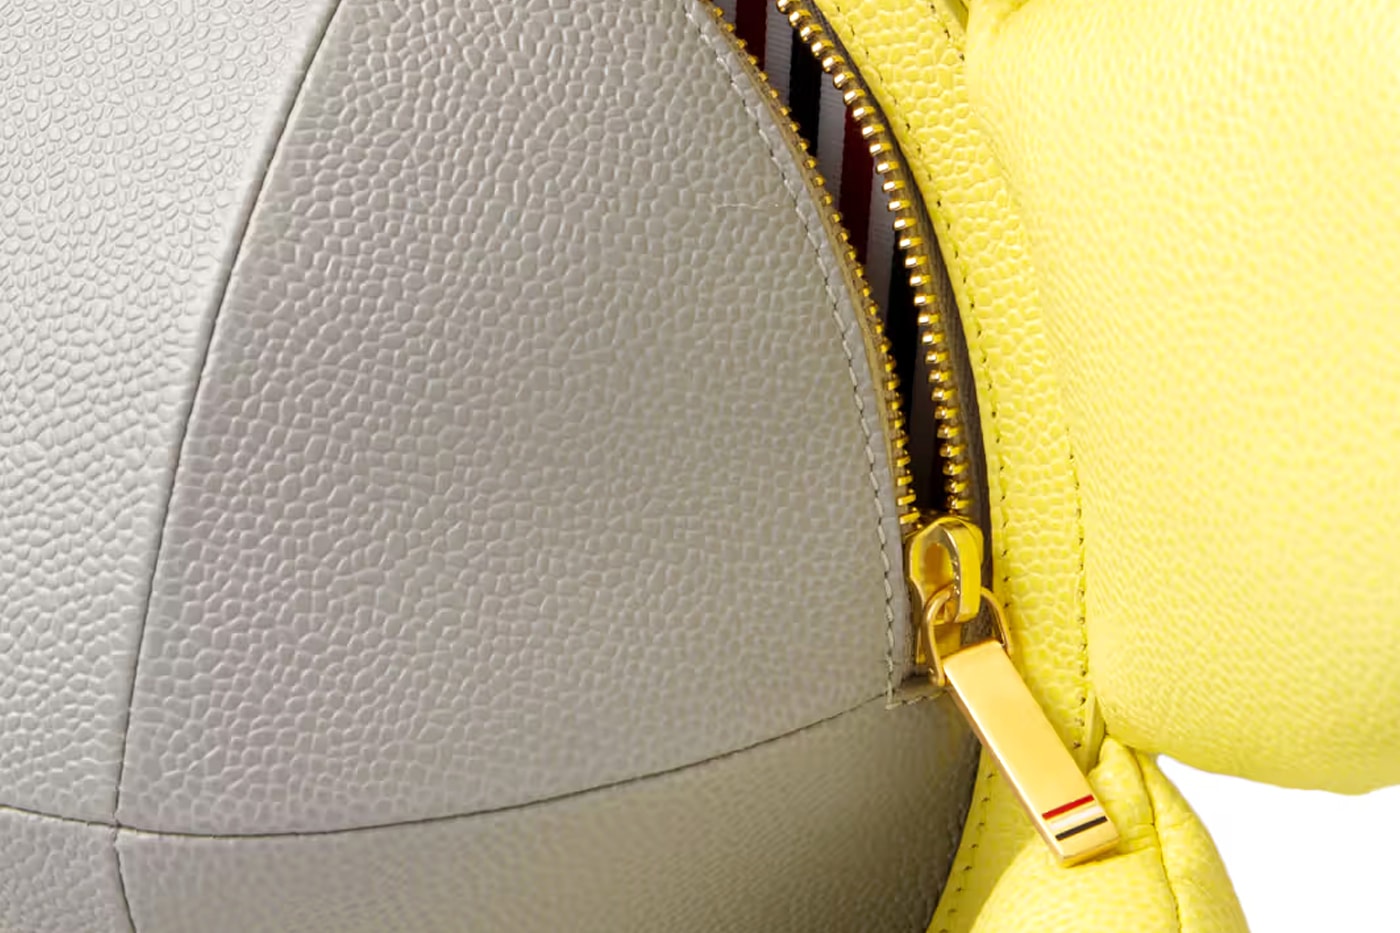 Gear Up for Spring With Thom Browne's Latest Sunflower Backpack